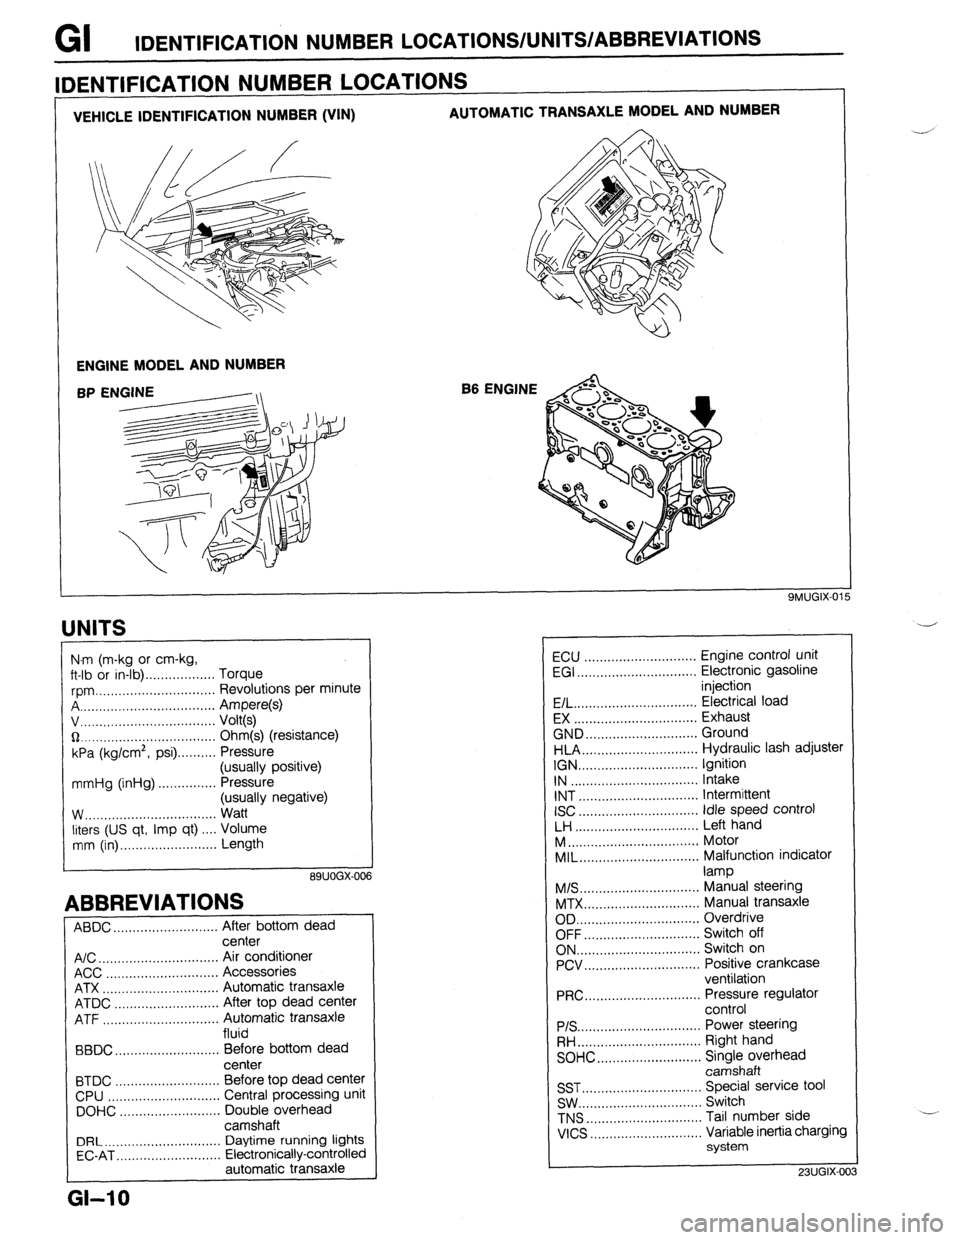 MAZDA PROTEGE 1992 User Guide GI IDENTIFICATION NUMBER LOCATIONS/UNITS/ABBREVlATlONS 
VEHICLE IDENTIFICATION NUMBER (VIN) AUTOMATIC TRANSAXLE MODEL AND NUMBER 
ENGINE MODEL AND NUMBER 
B6 ENGINE 
IDENTIFICATION NUMBER LOCATIONS 
U